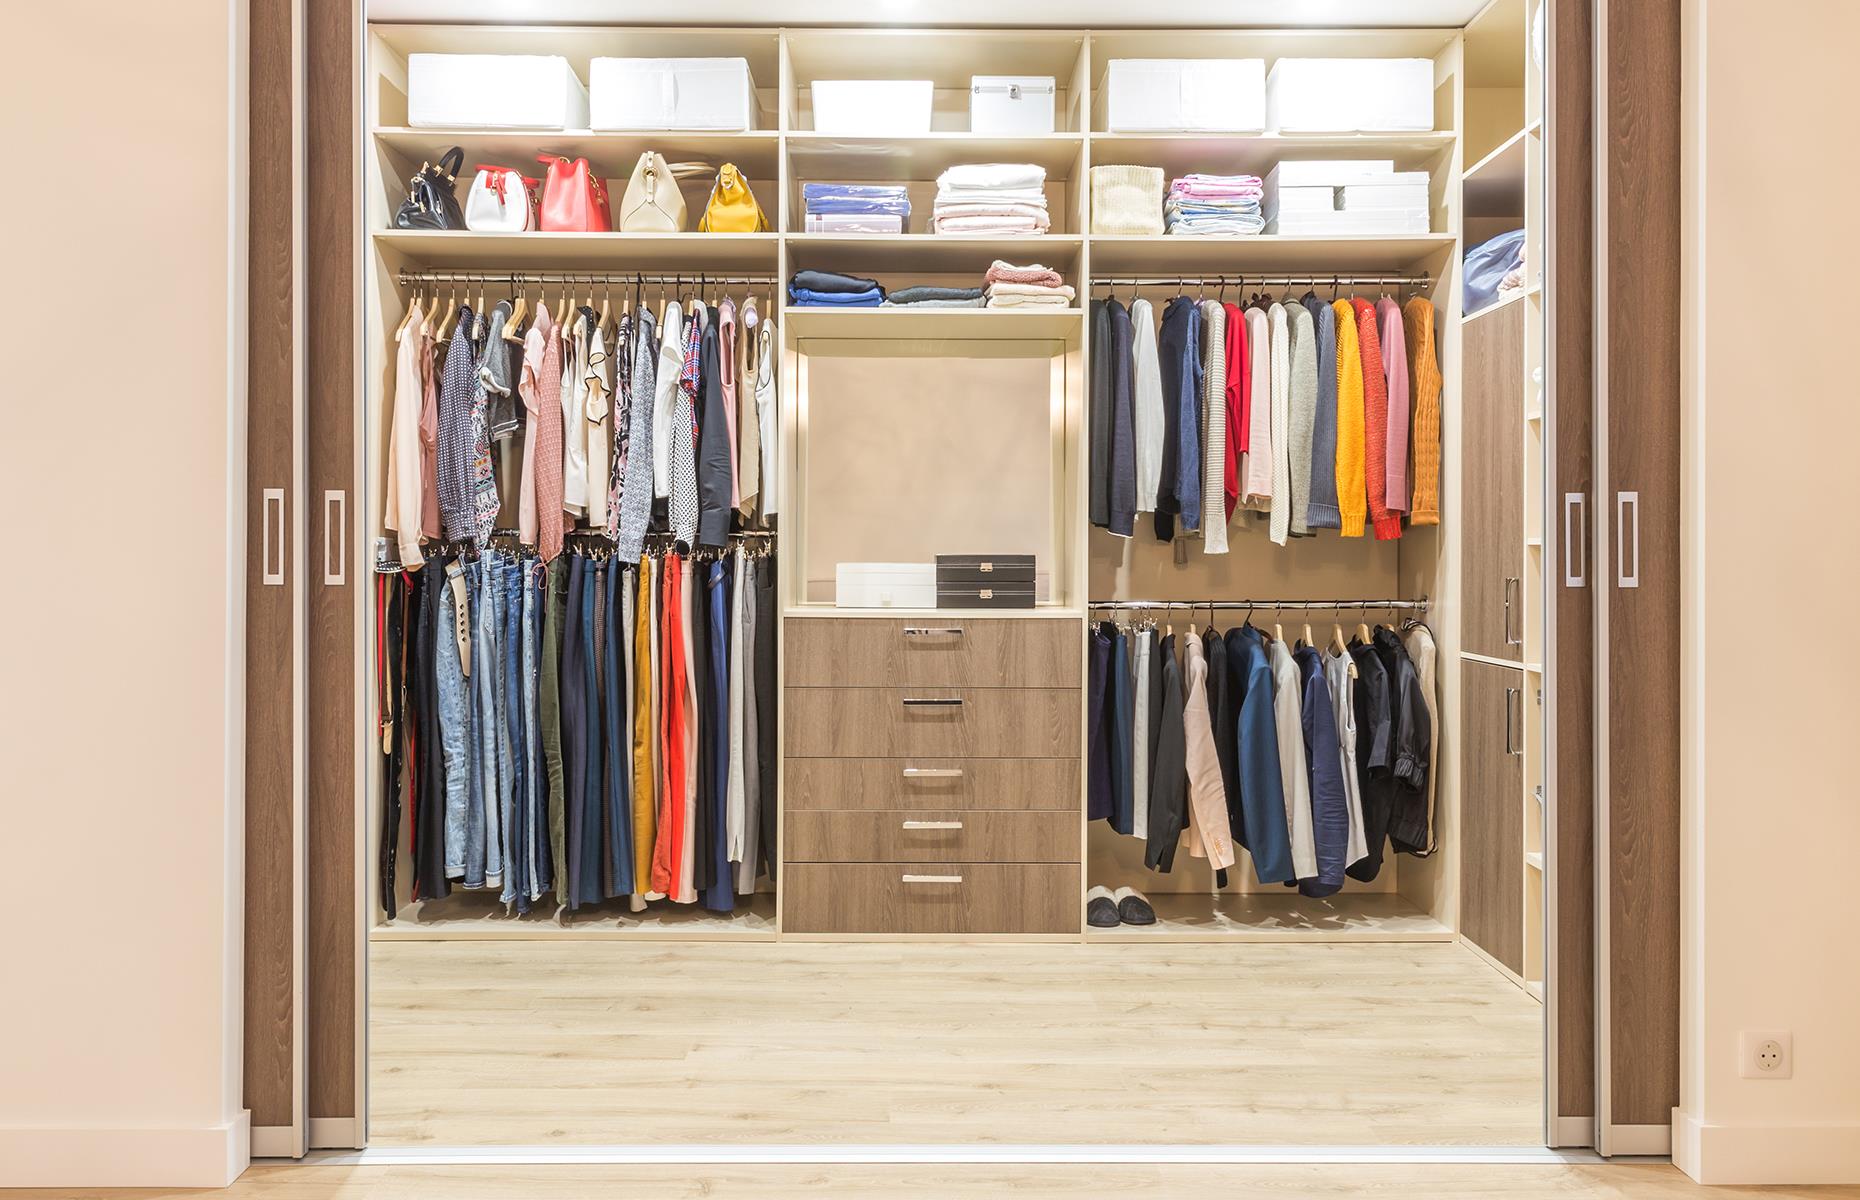 <p>Who doesn't dream of a <a href="https://www.loveproperty.com/gallerylist/69334/dream-walk-in-wardrobes?page=1">walk-in closet</a>? For many of us it's a goal for our one-day home, but if you have the space, a walk-in offers excellent storage options not just for clothes but handbags and shoes too. Plus, it's ideal for couples who get up at different times –there's no need to disturb your sleeping partner as you fumble about at 6am for your favorite jacket. </p>